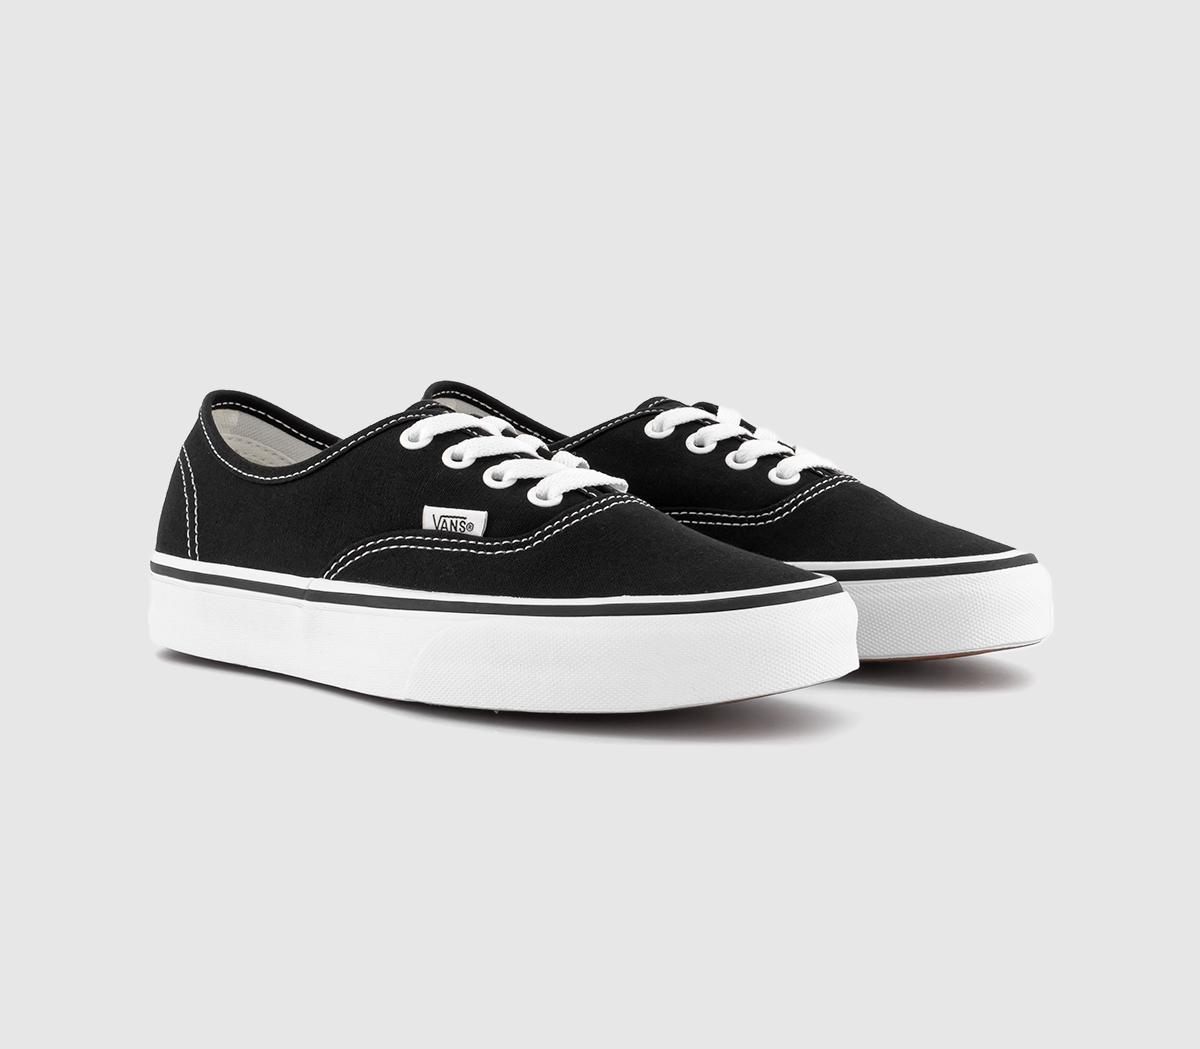 Vans Authentic Trainers In Black And White, 8